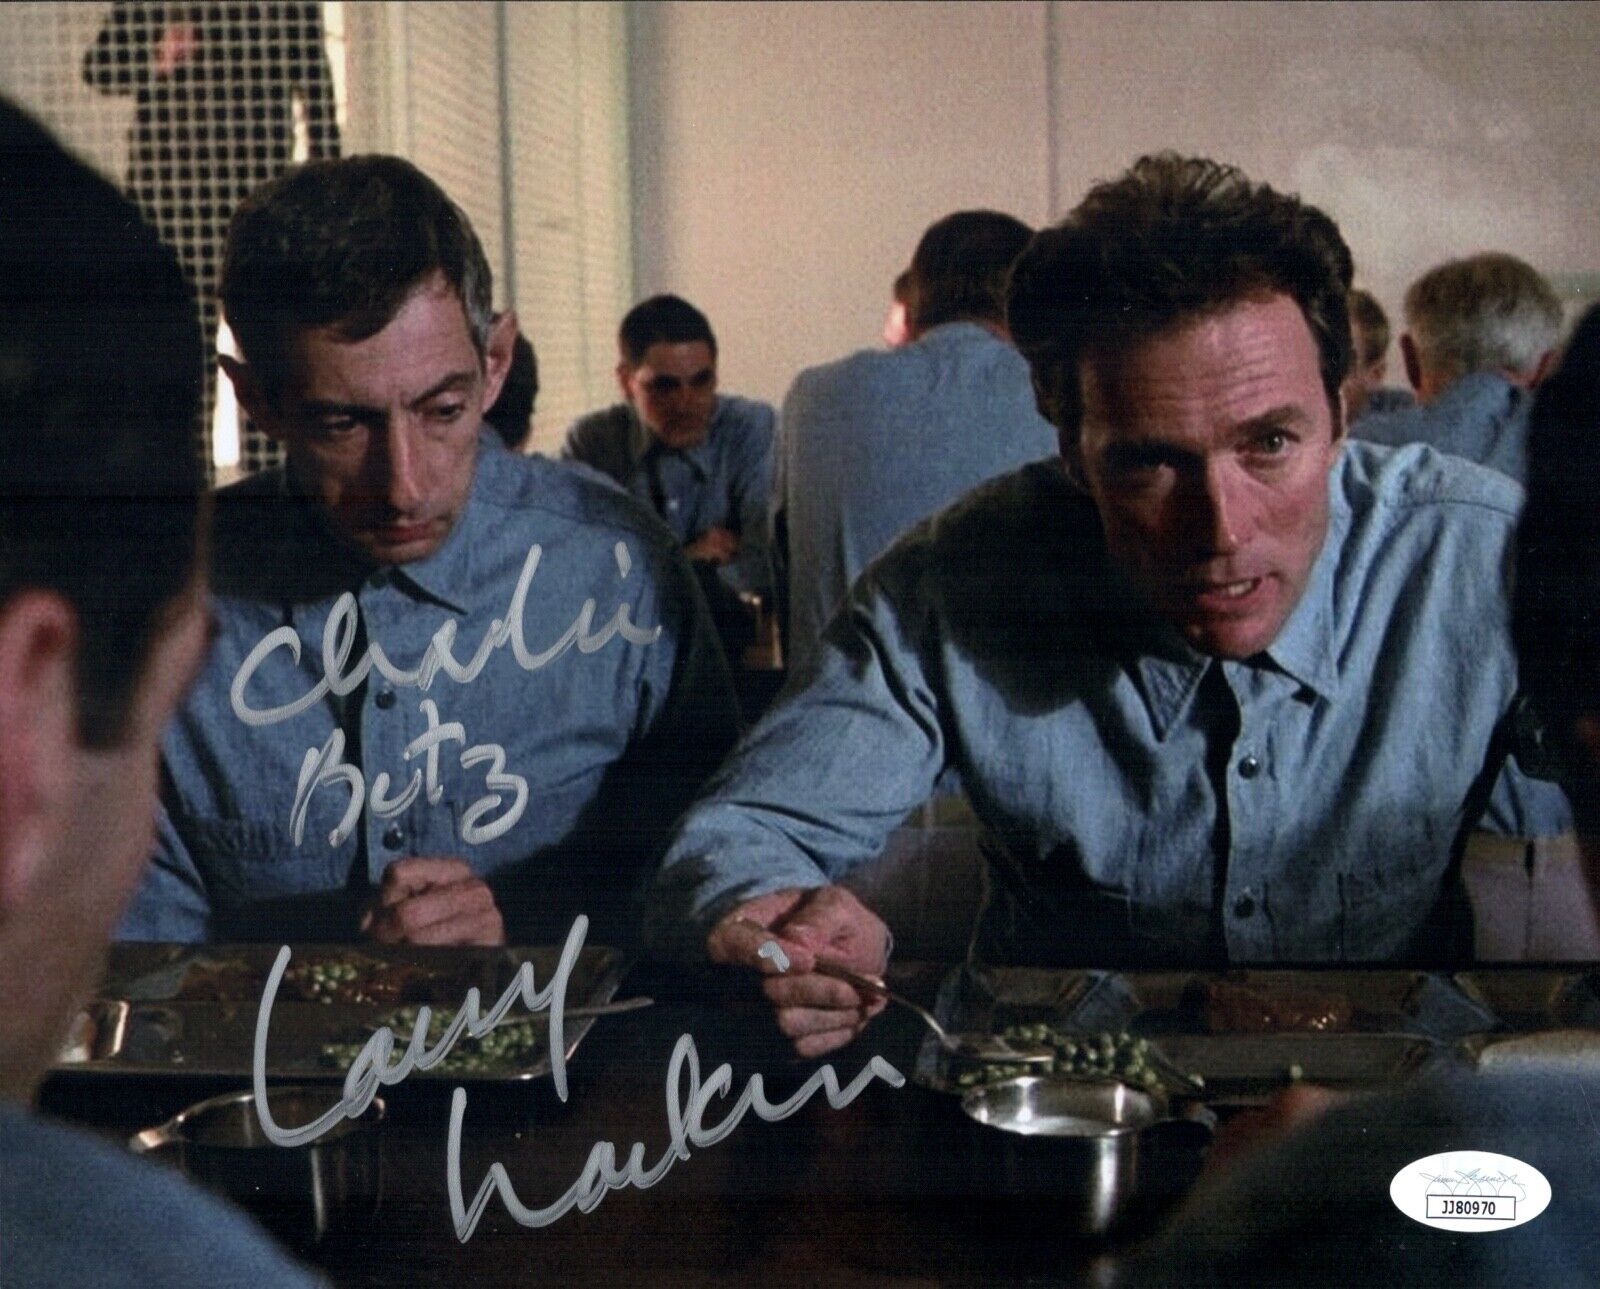 LARRY HANKIN Escape from Alcatraz Signed 8x10 Photo Poster painting IN PERSON Autograph JSA COA